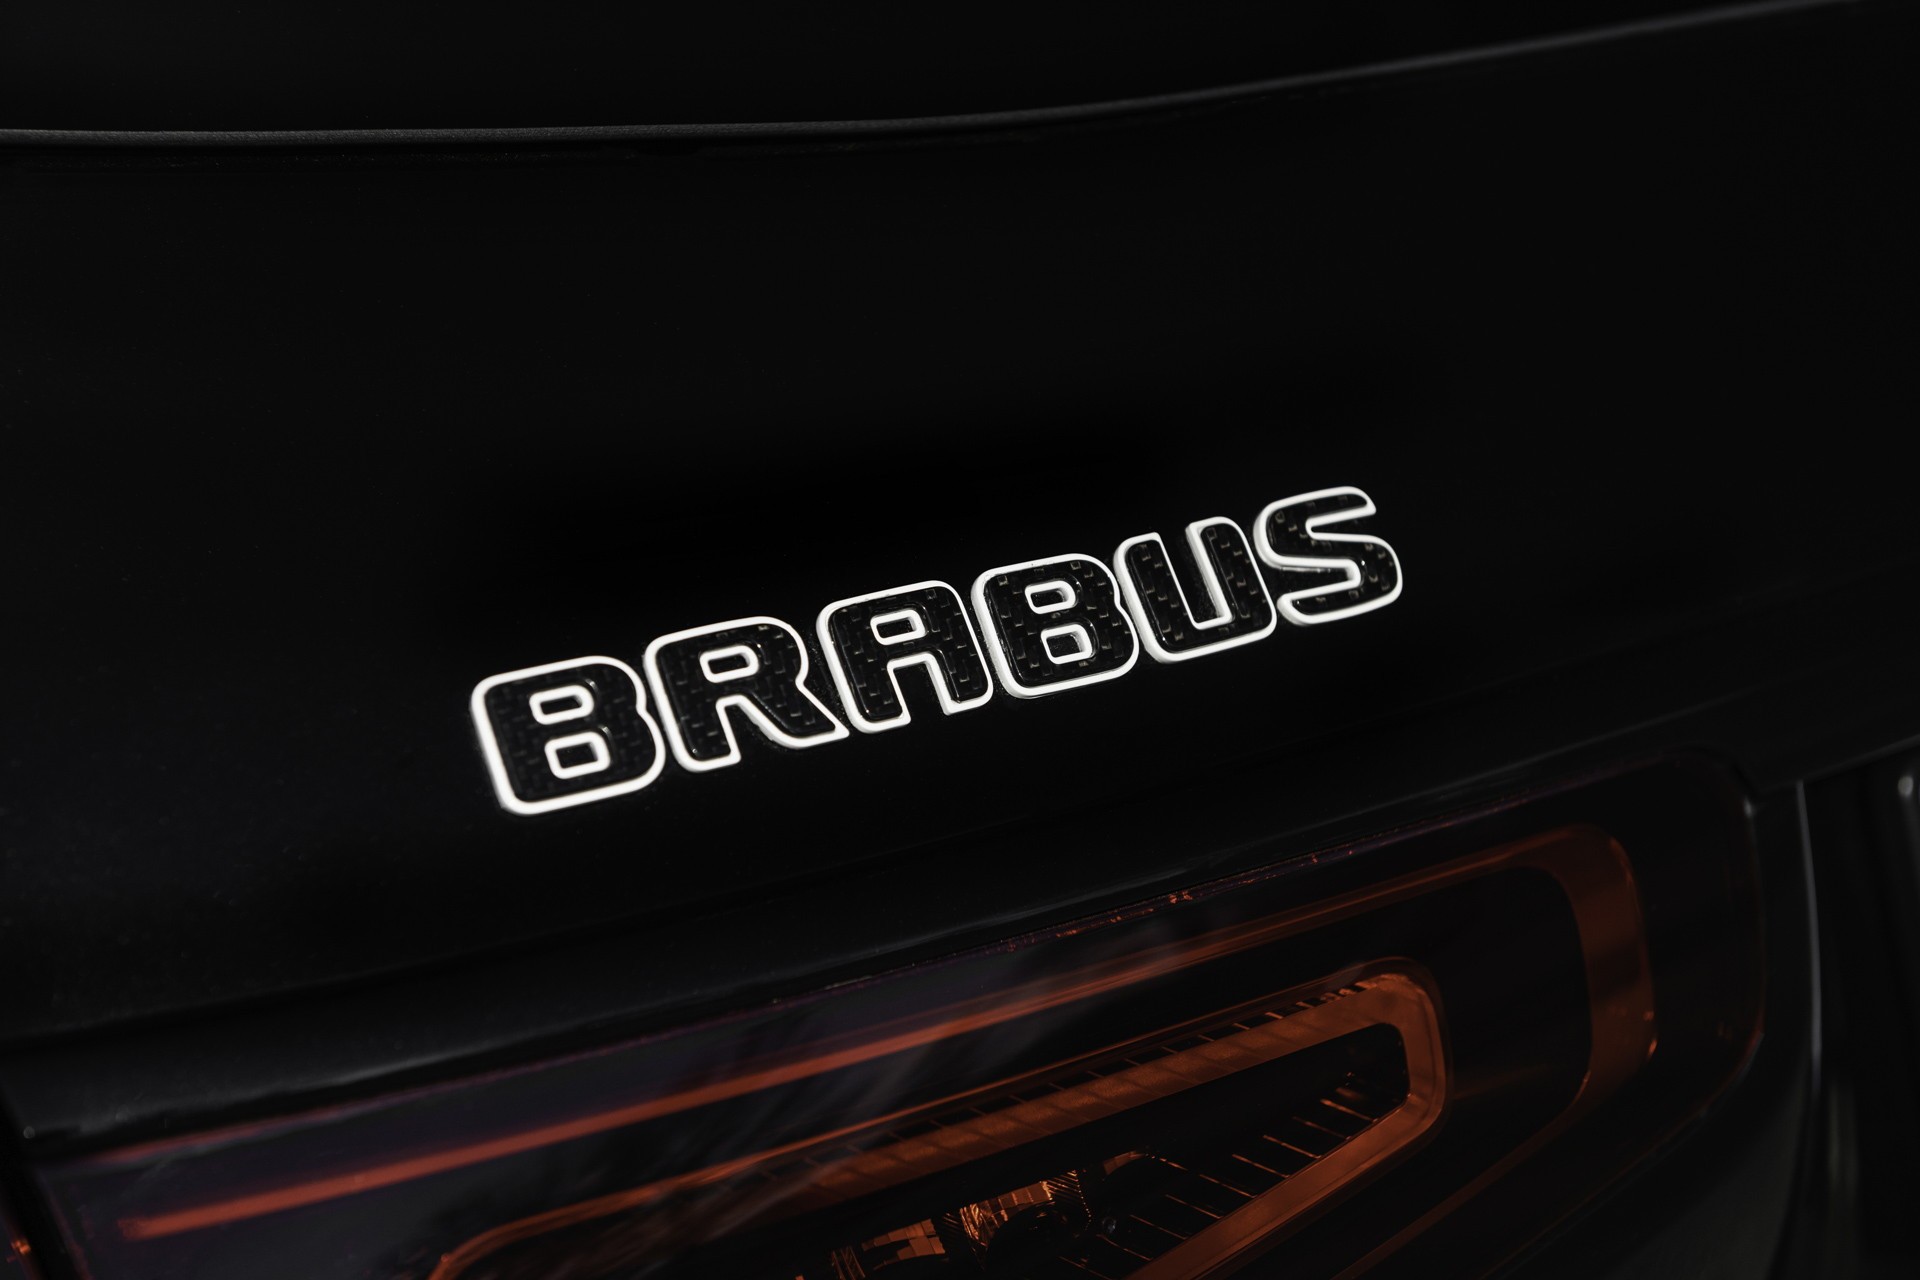 New Brabus 900 Superblack Is What the Mercedes-AMG GLS 63 Should